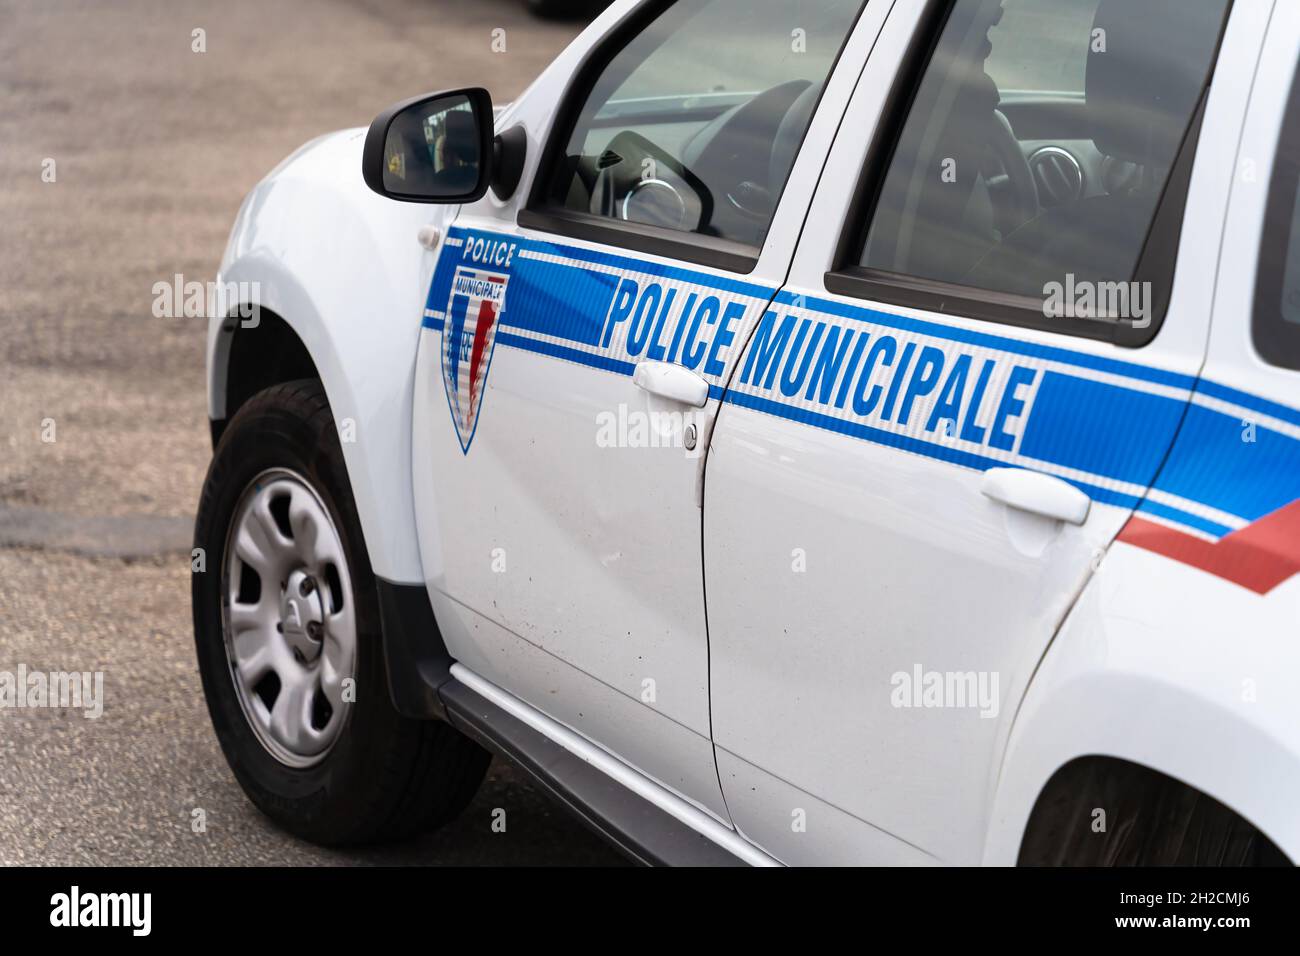 Honfleur, France - August 4, 2021: A white car of French Municipal police with french sign Police municipale. Stock Photo